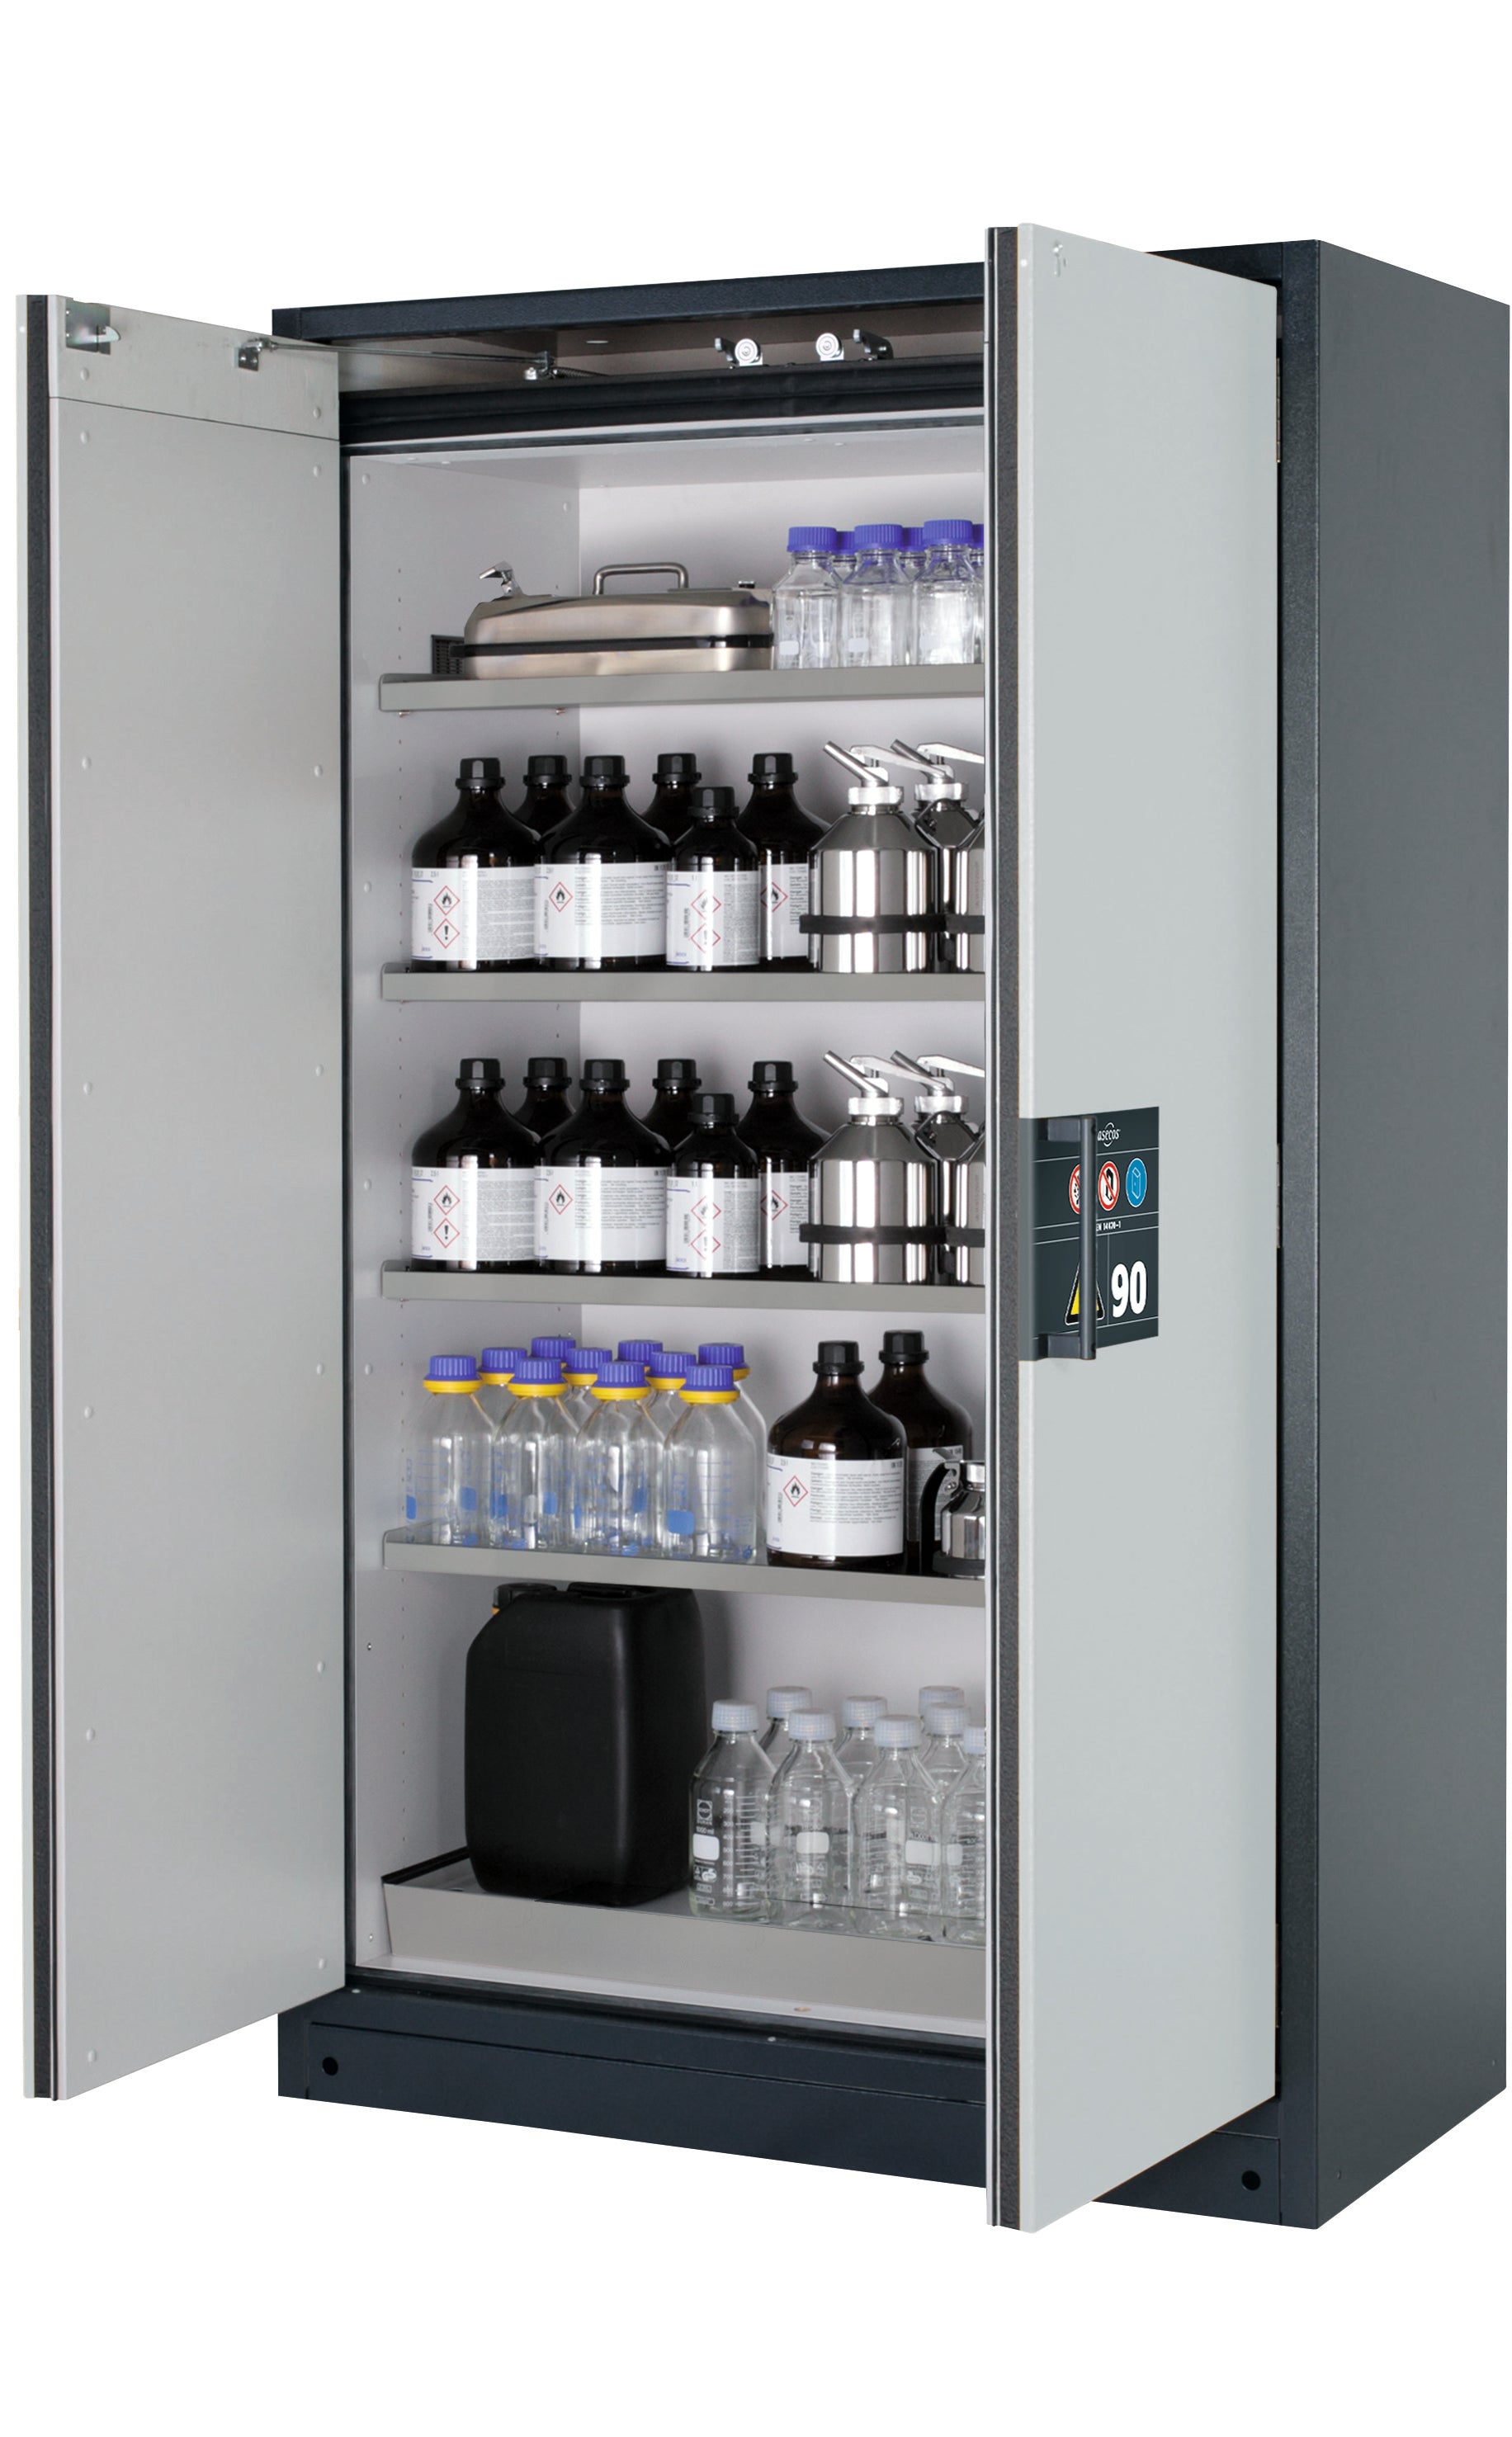 Type 90 safety storage cabinet Q-CLASSIC-90 model Q90.195.120 in light grey RAL 7035 with 4x shelf standard (stainless steel 1.4301),